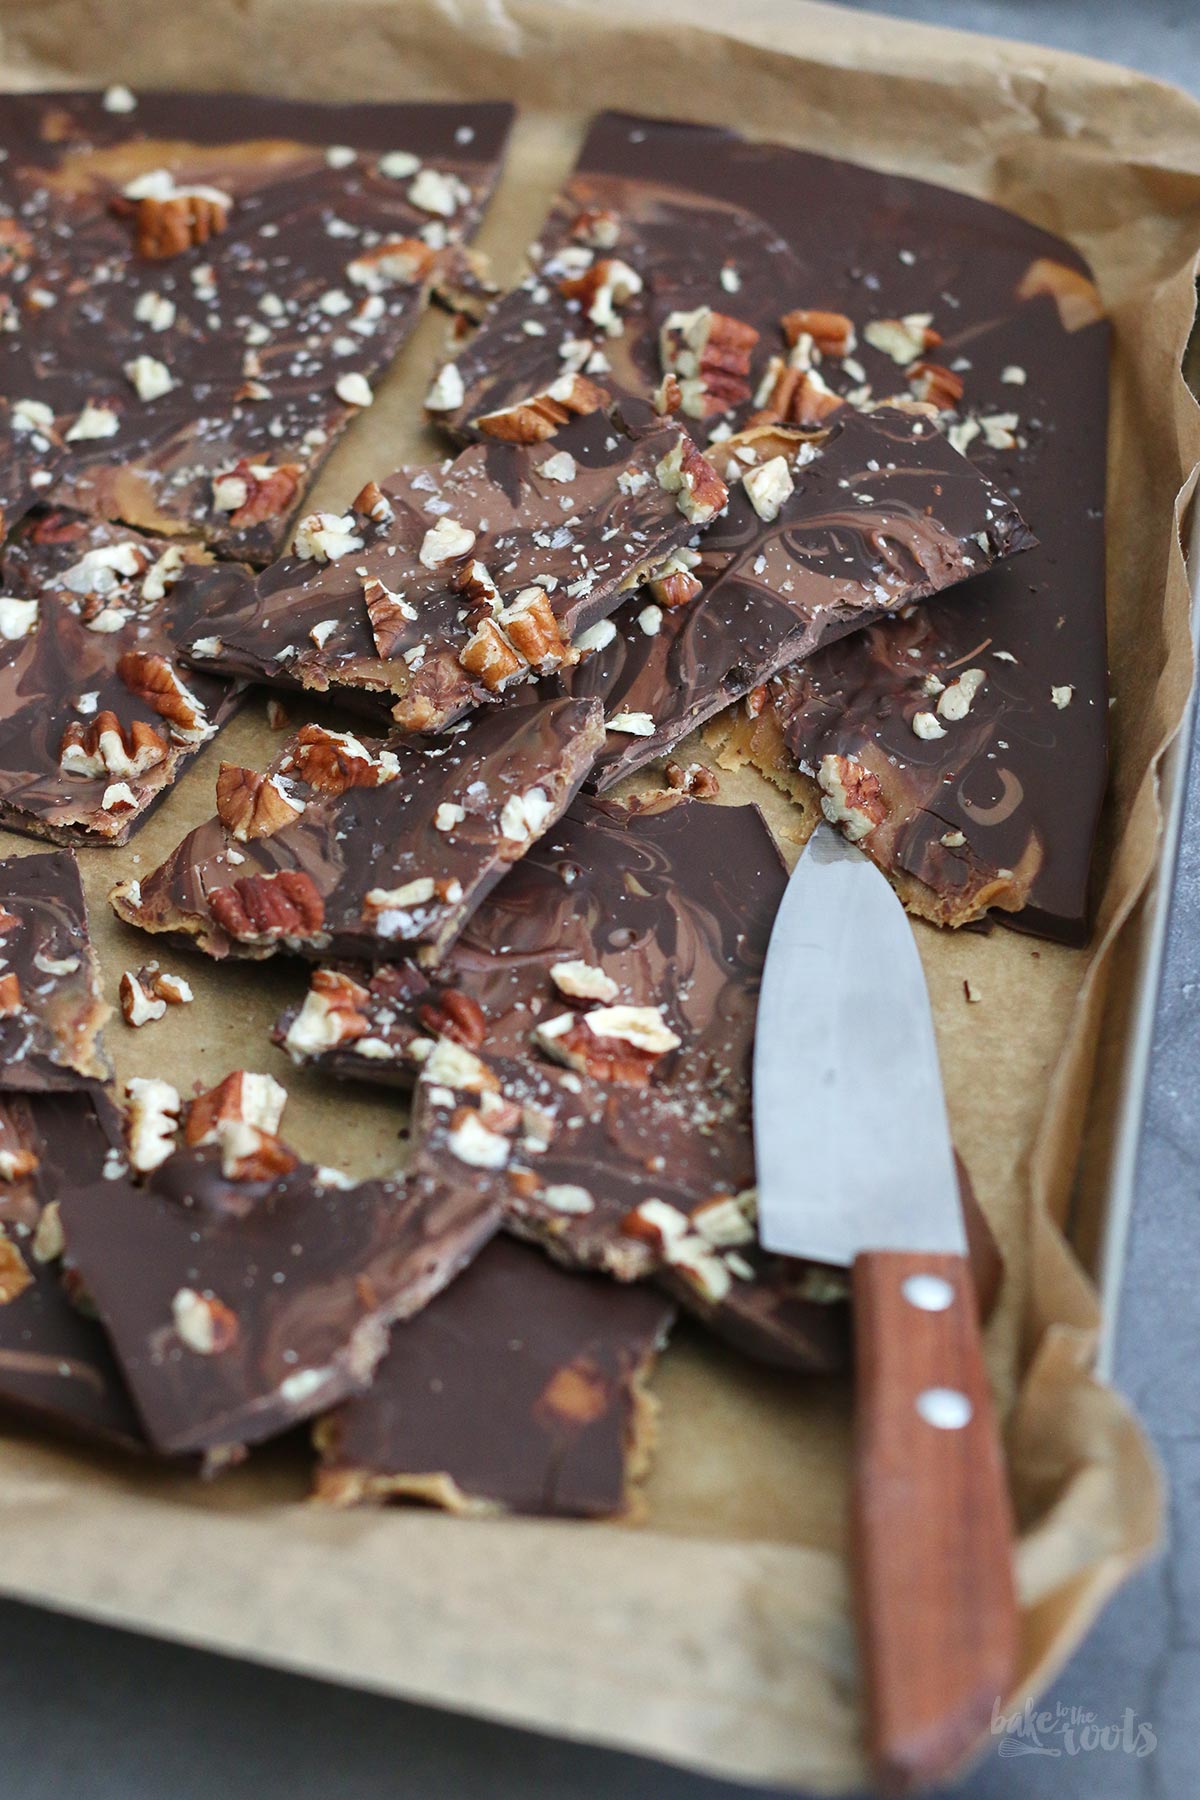 Salted Caramel Pecan Chocolate Bark | Bake to the roots